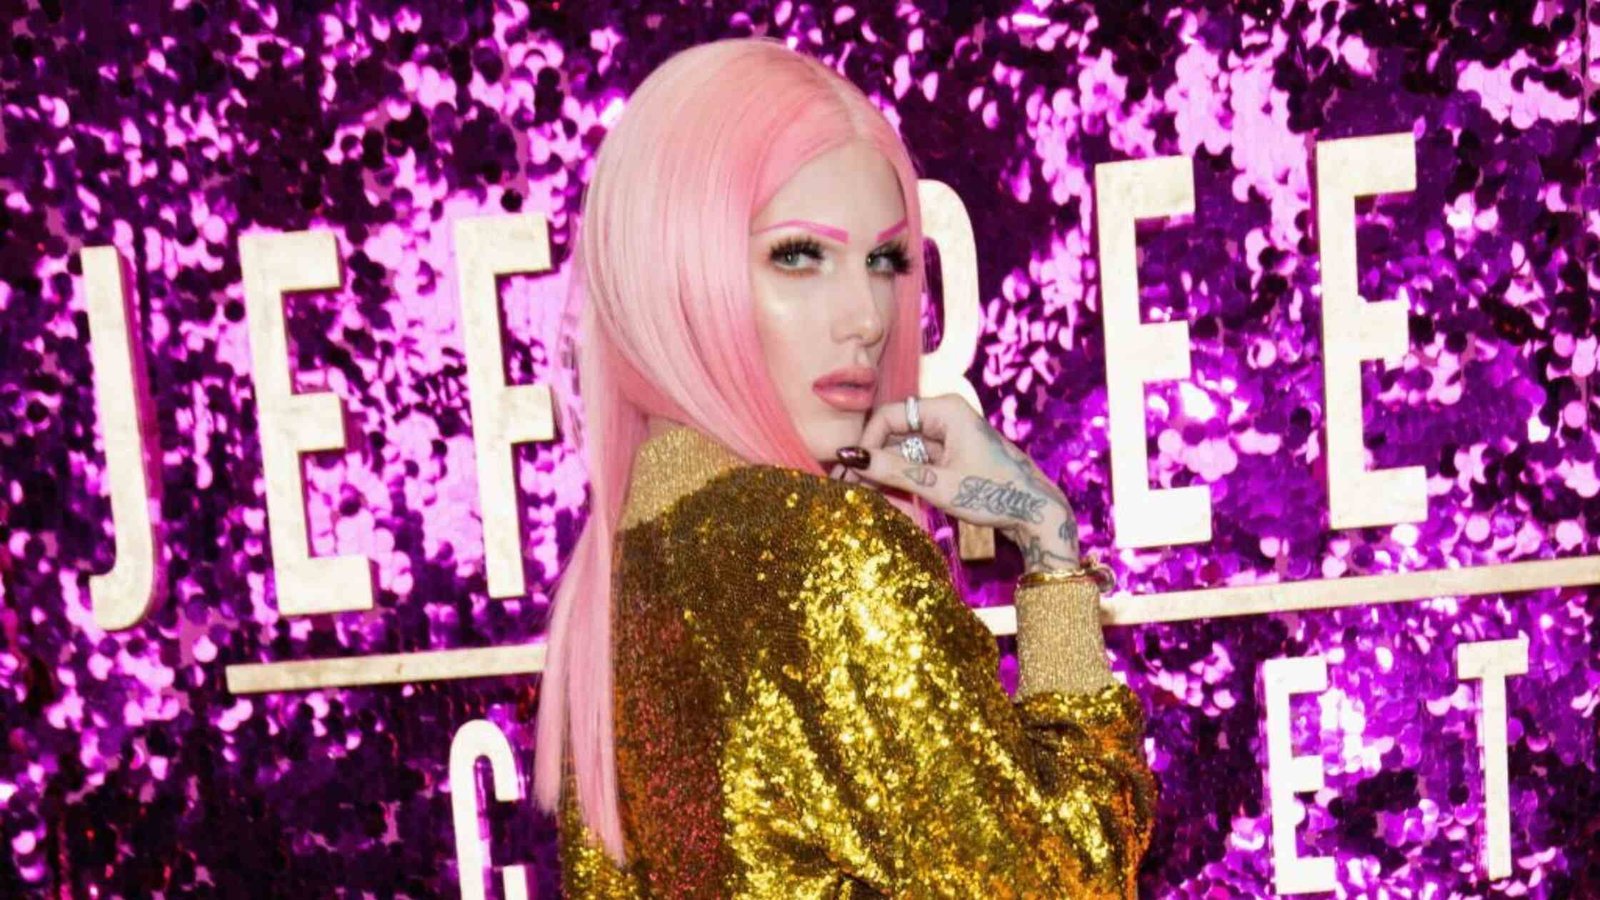 Jeffree Star attends the 3rd Annual RuPaul's DragCon